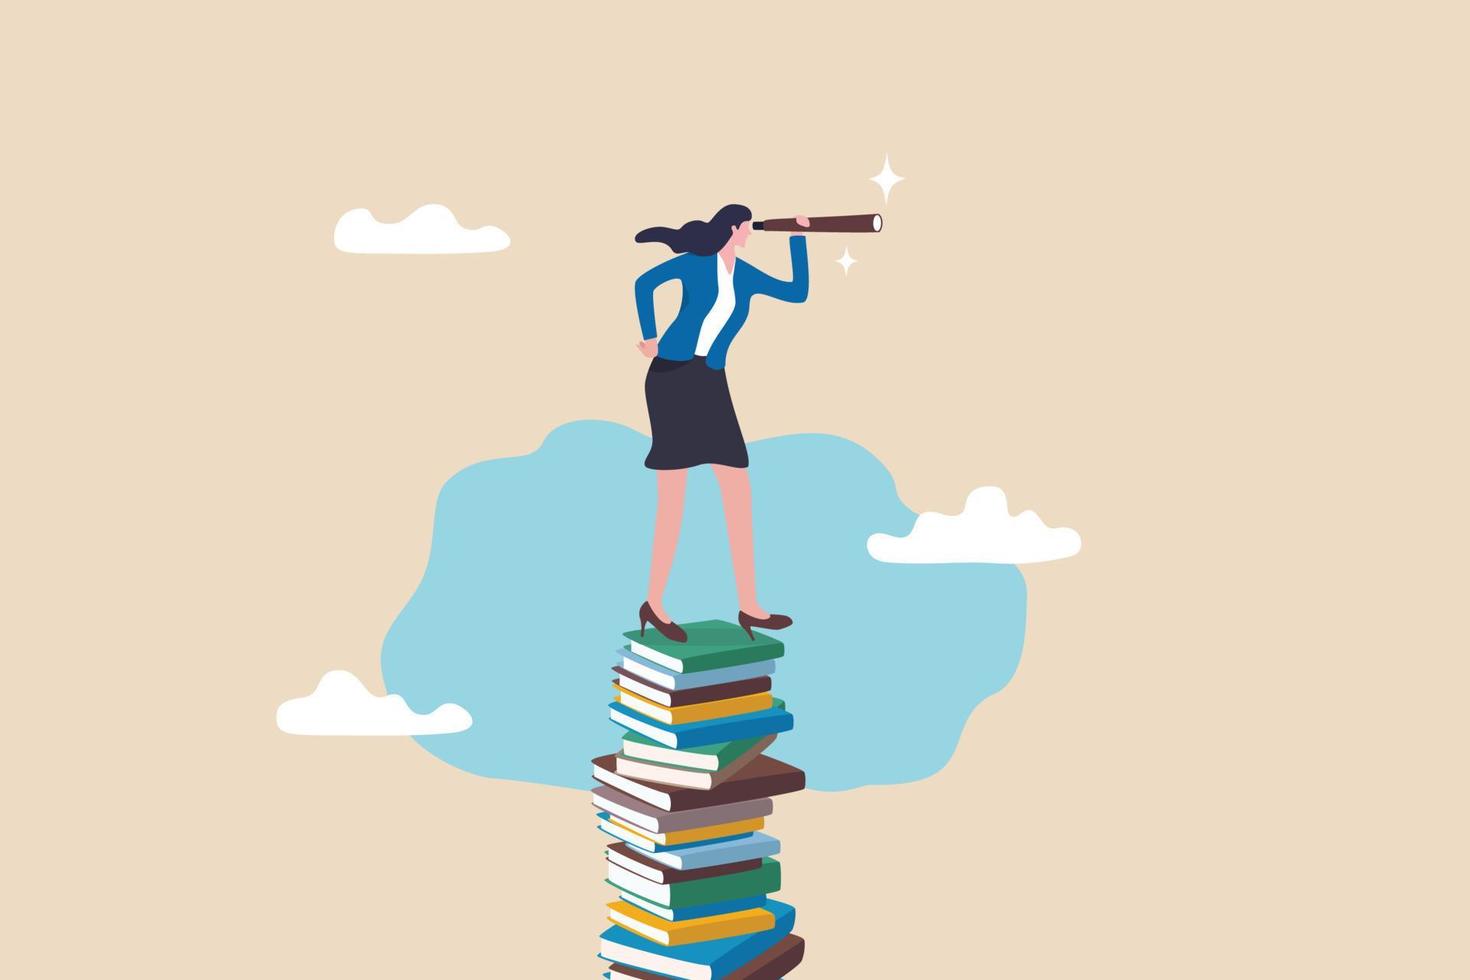 Book or education to help career advancement, knowledge or wisdom for business visionary, leadership or opportunity concept, confidence businesswoman leader on high books stack look through telescope. vector